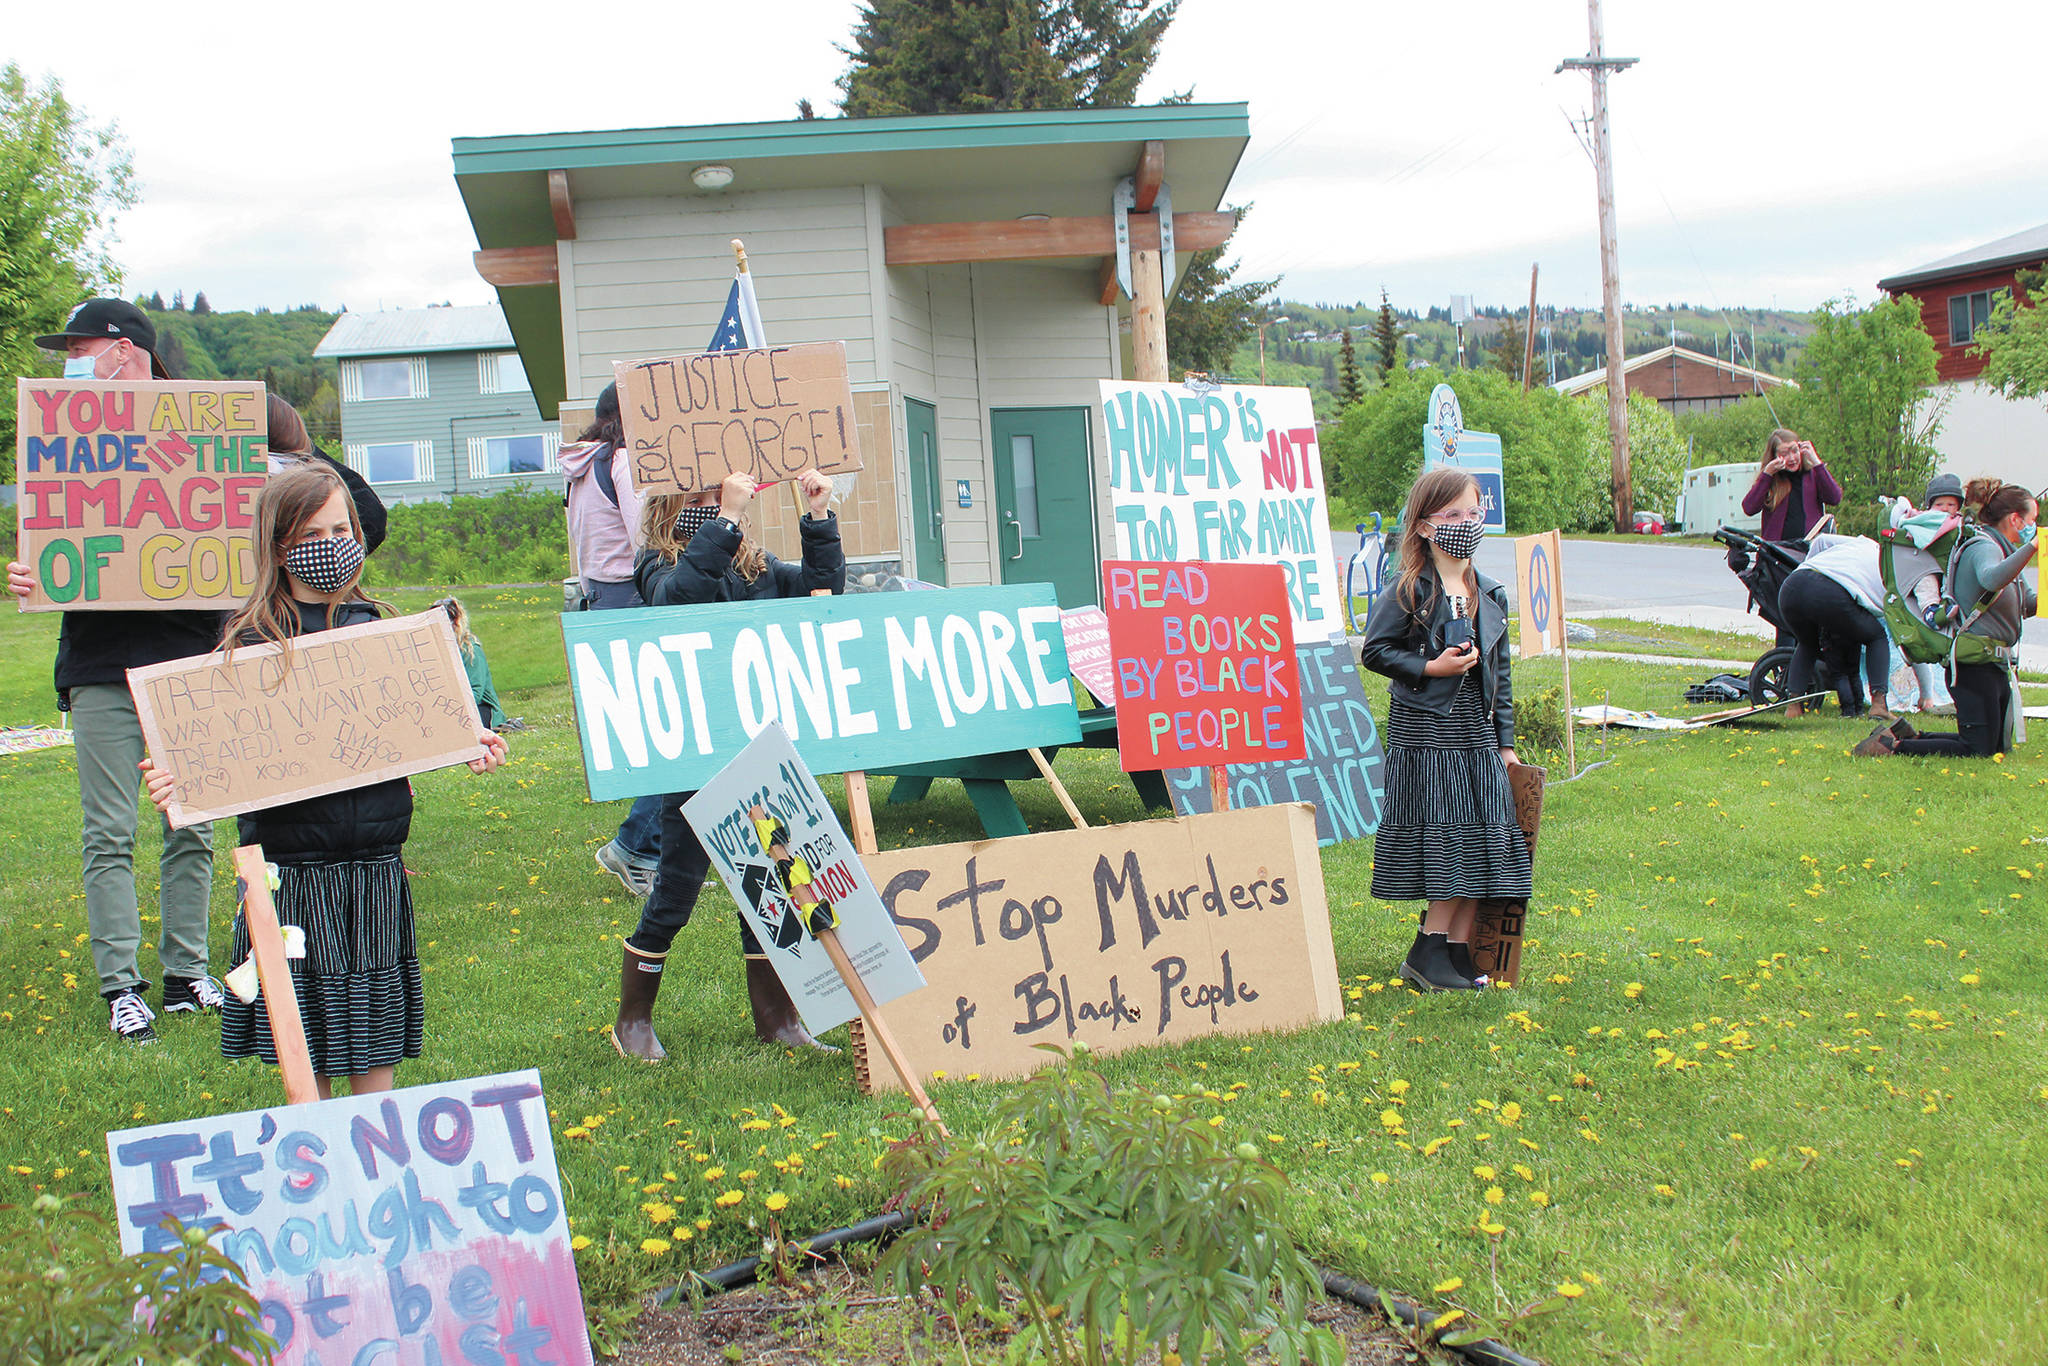 Families and their children wave to drivers from a Black Lives Matter demonstgration at WKFL Park on Tuesday, June 2, 2020 in Homer, Alaska. (Photo by Megan Pacer/Homer News)